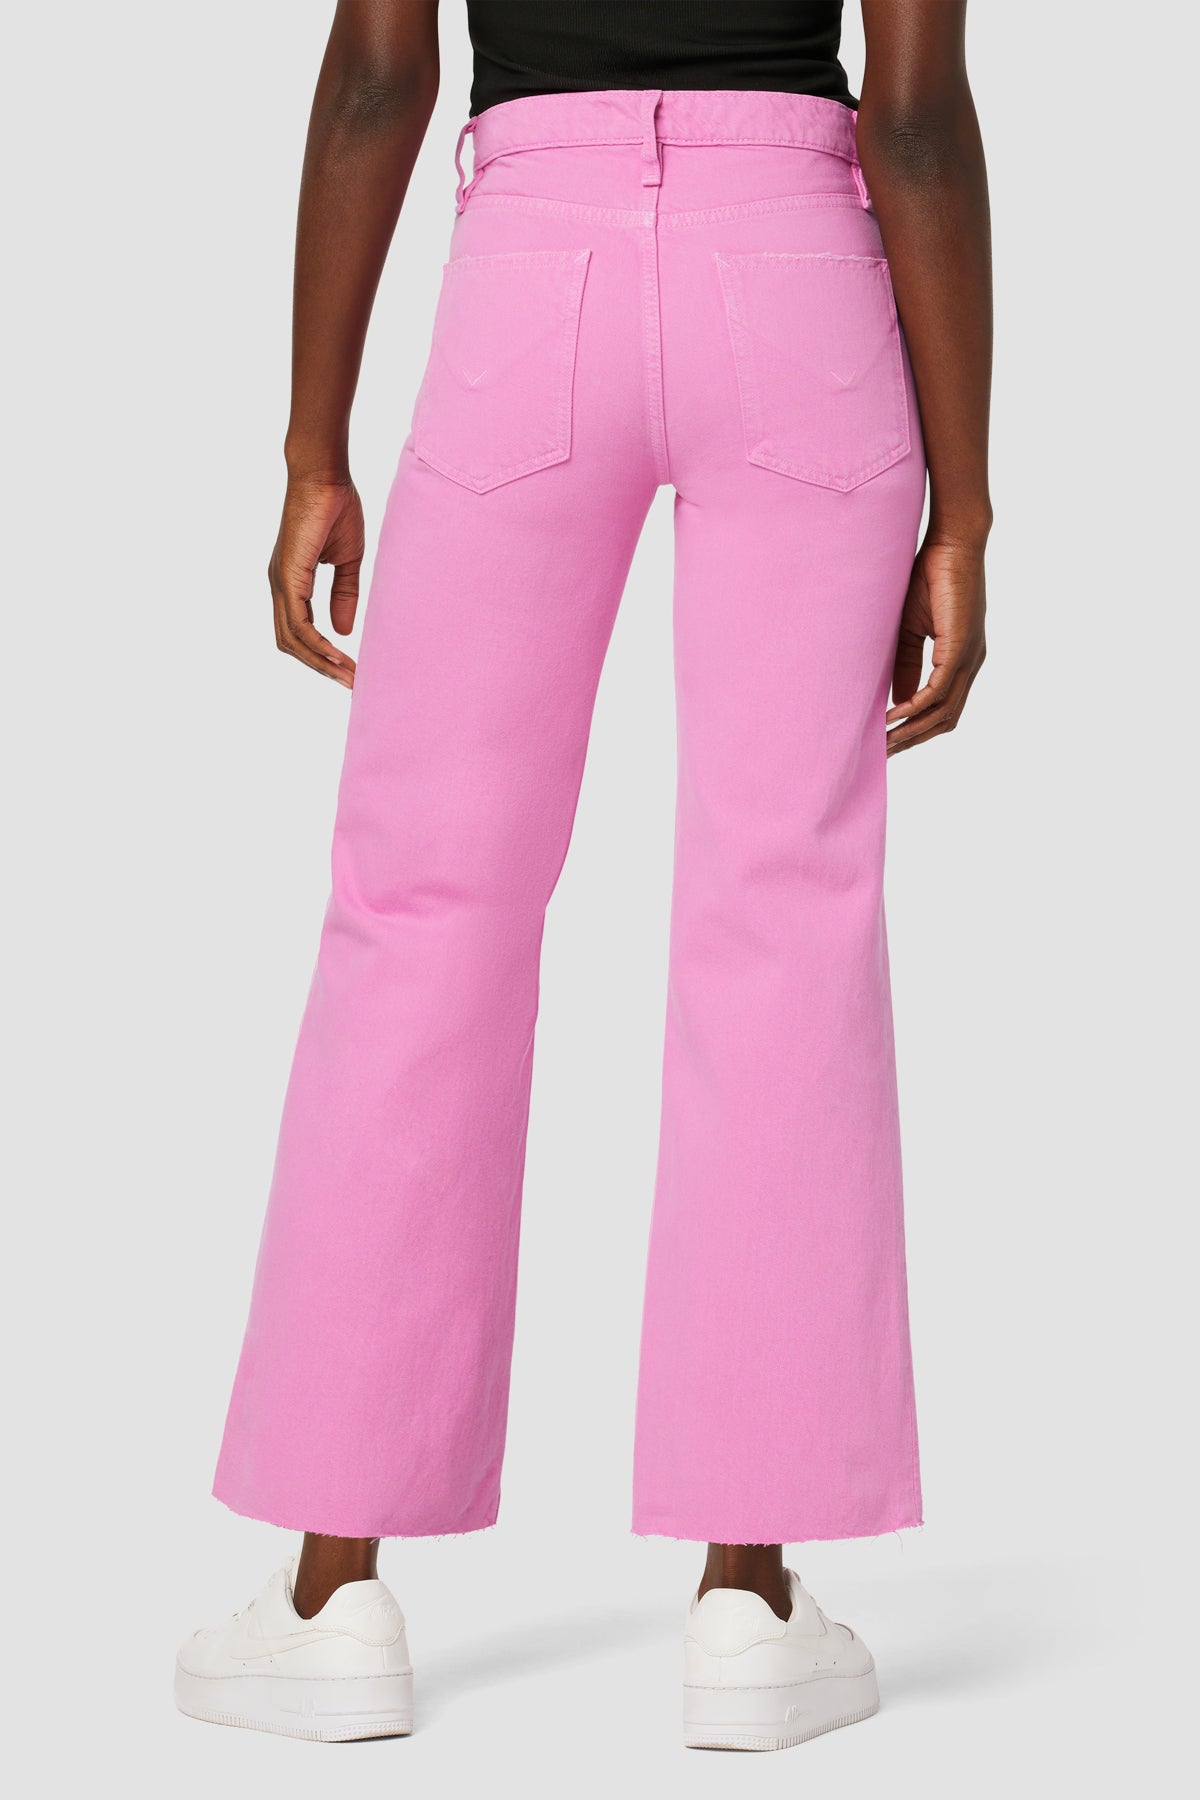 Women's Pink Pants, Wide, Flared, Cargo, Leather